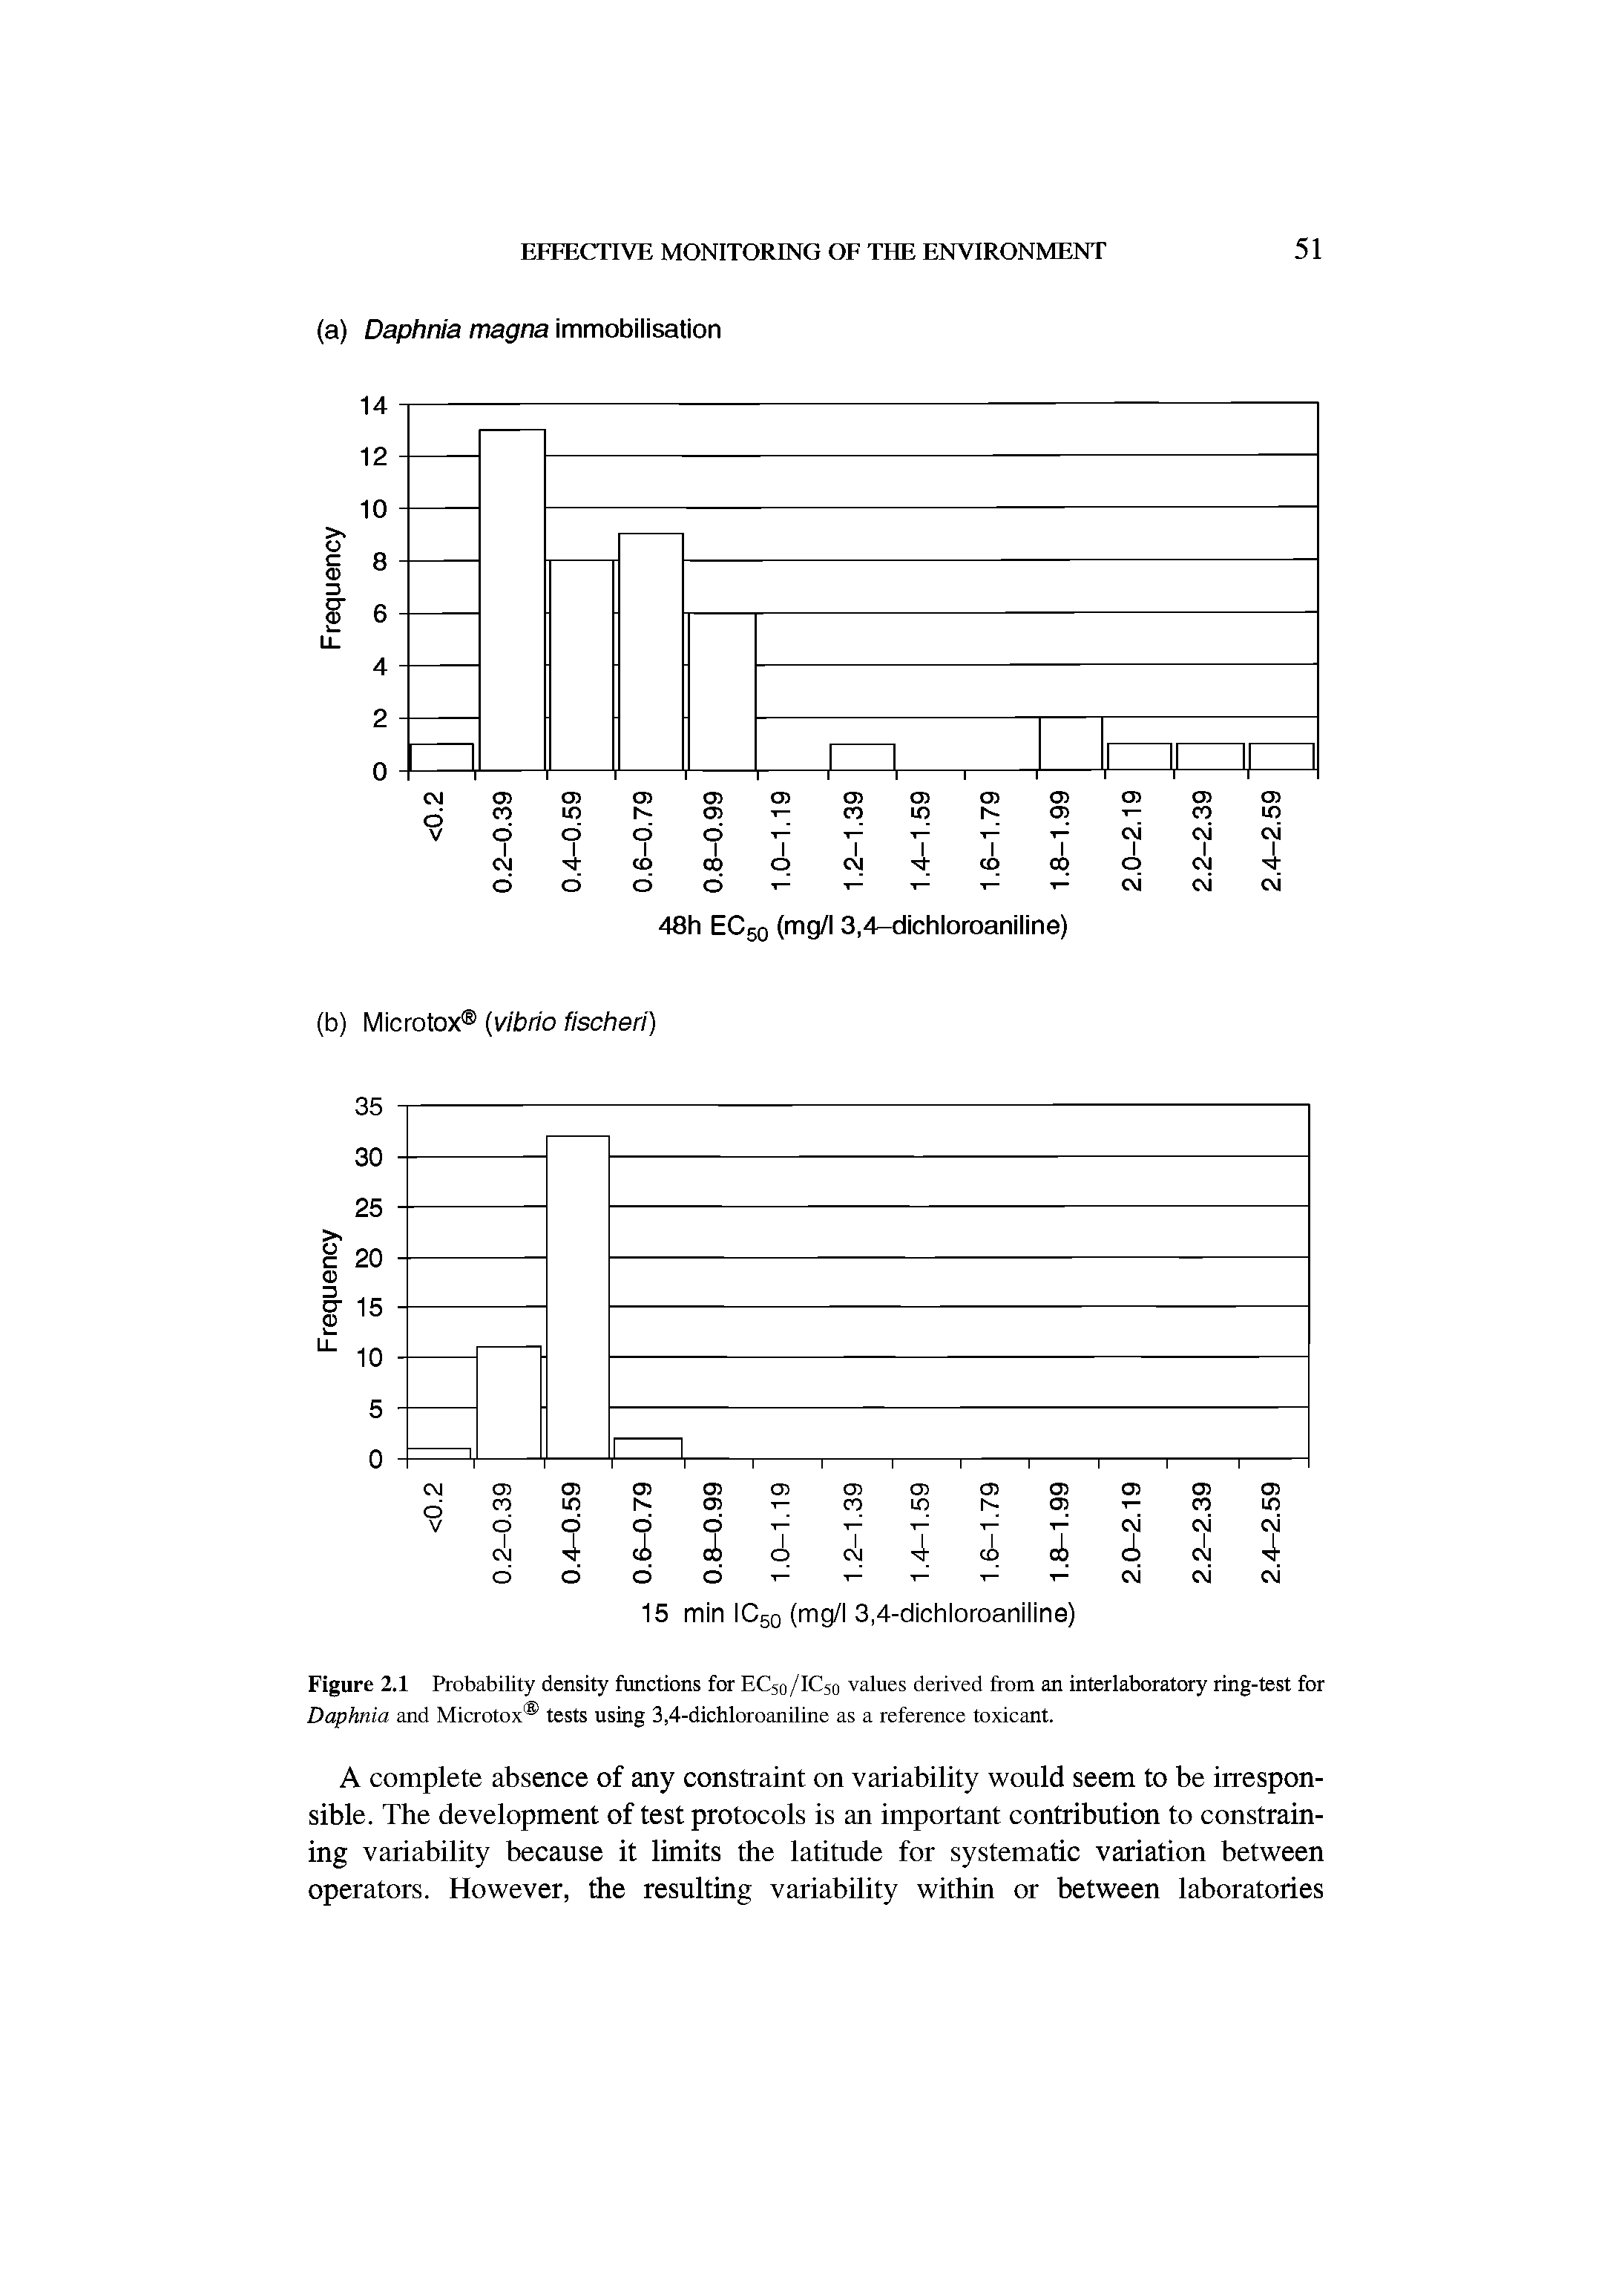 Figure 2.1 Probability density functions for EC50/IC50 values derived from an interlaboratory ring-test for Daphnia and Microtox tests using 3,4-dichloroaniline as a reference toxicant.